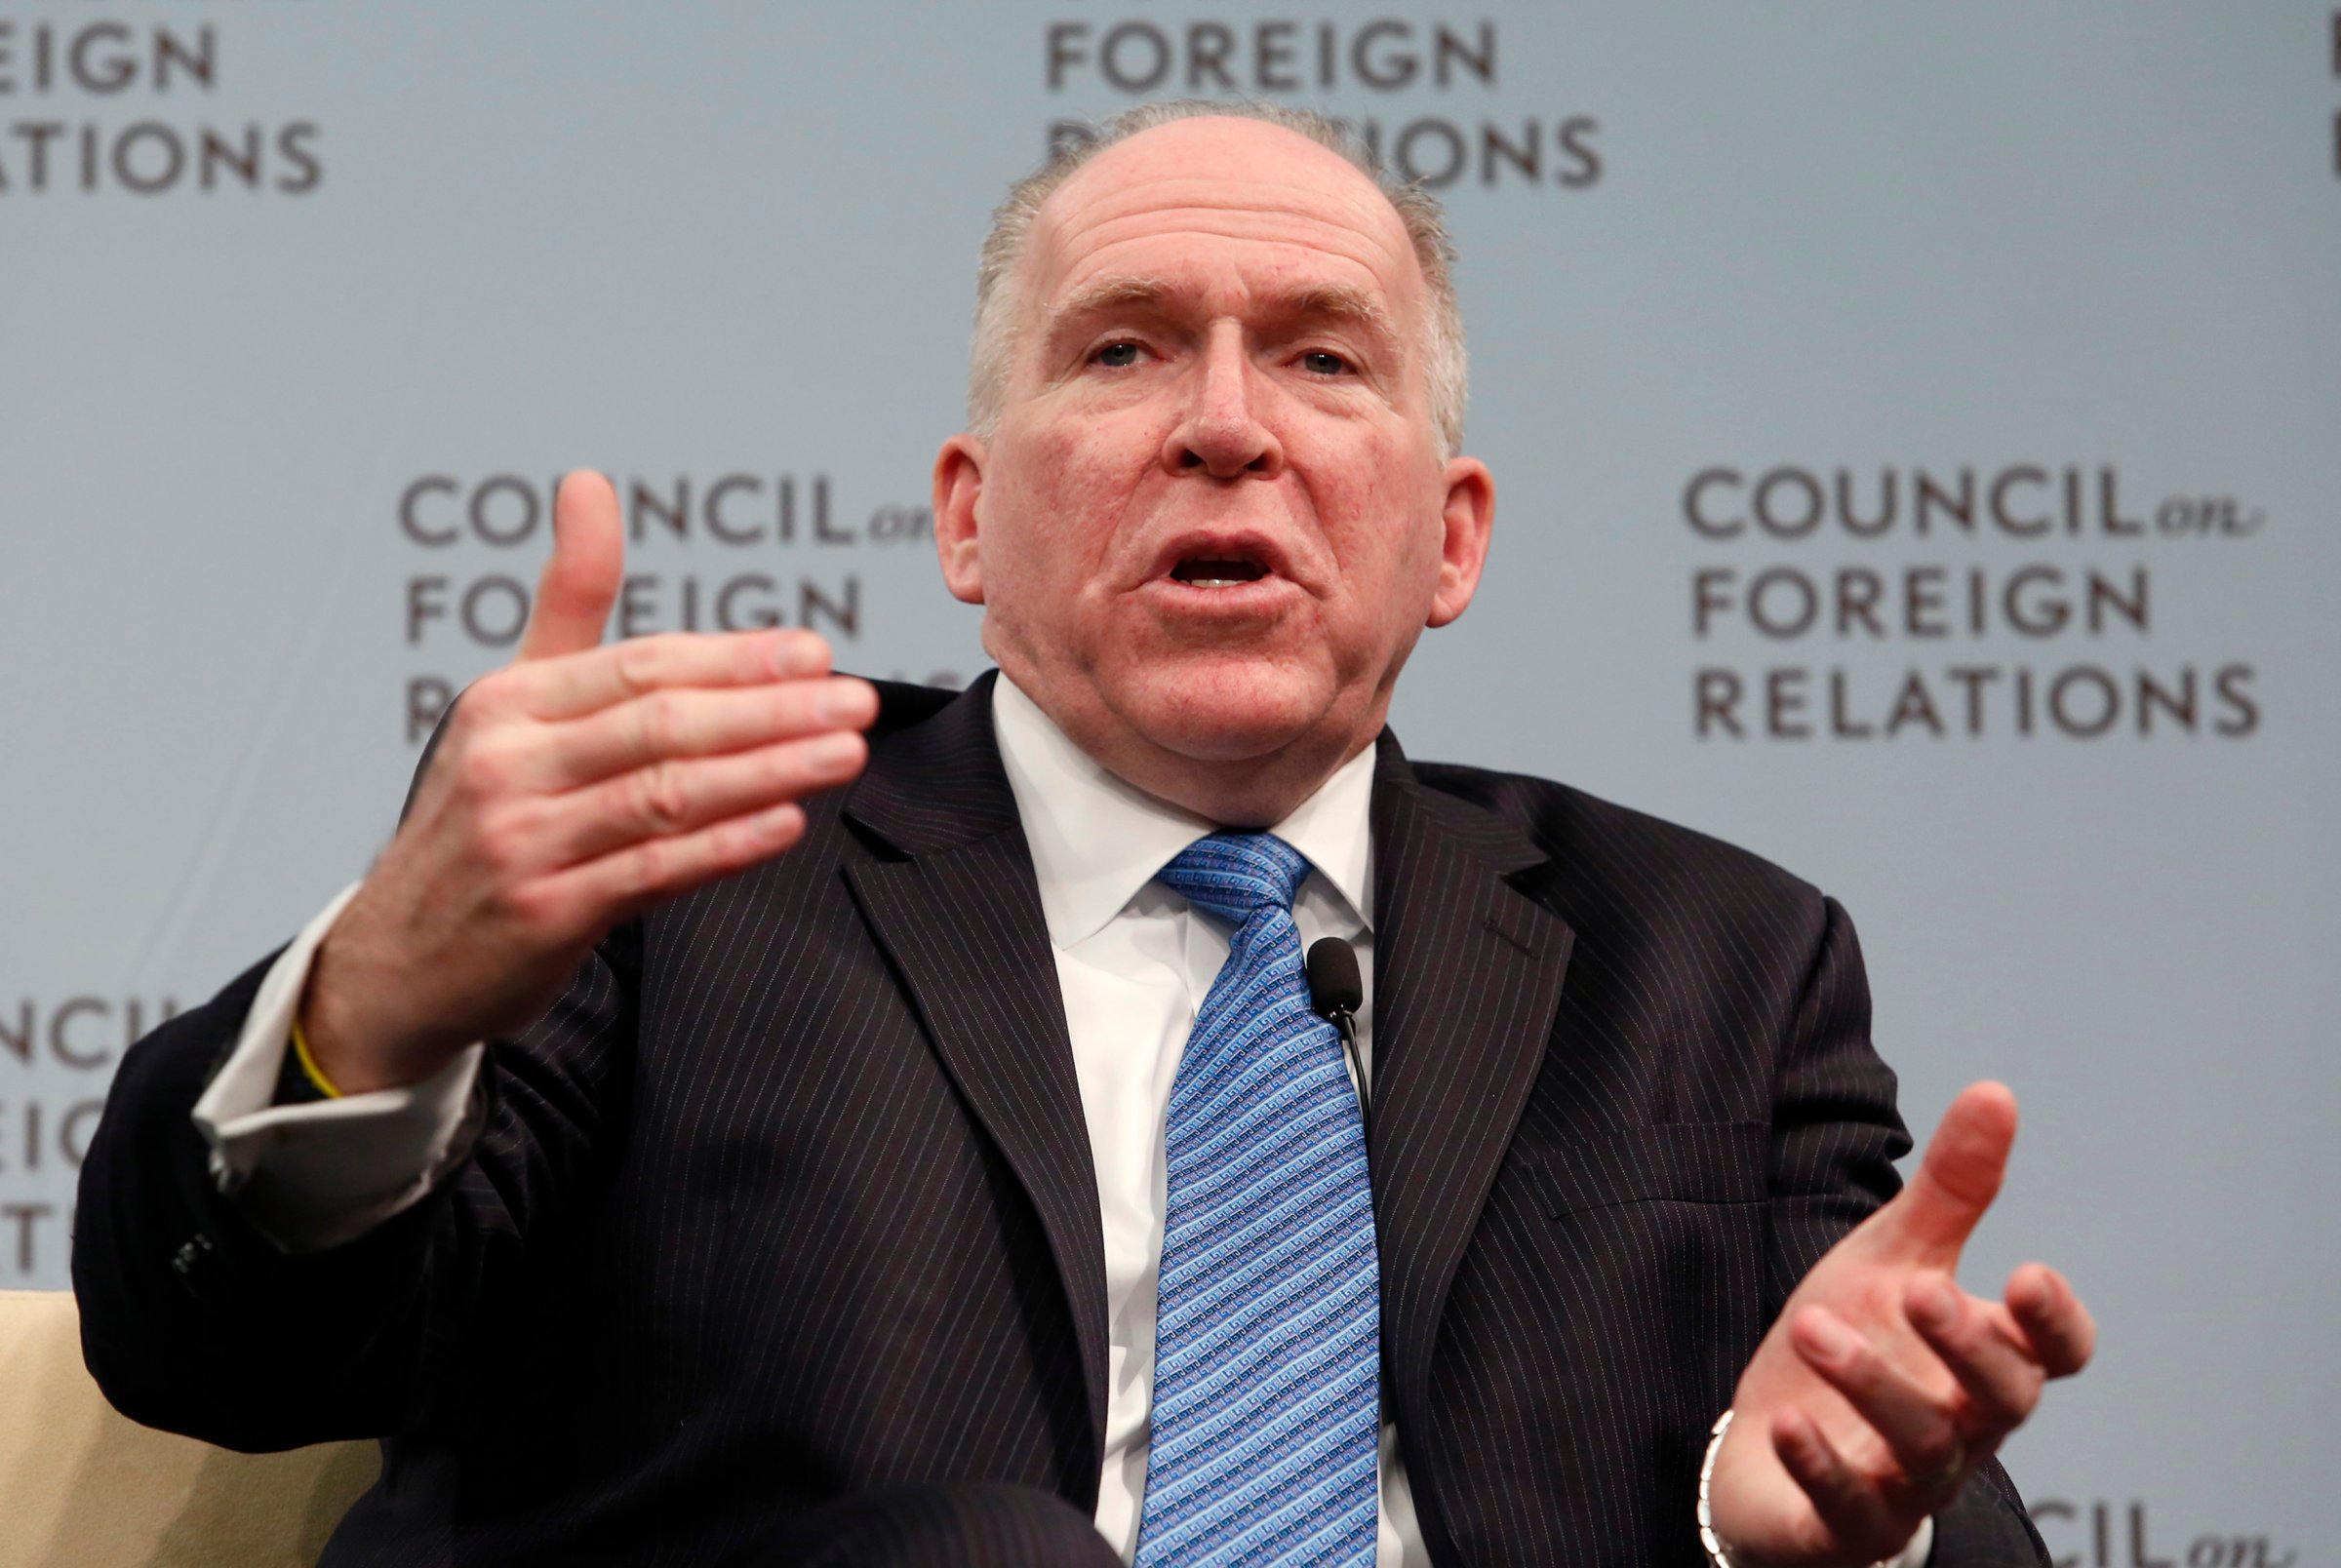 CIA Director John Brennan speaks at a Council on Foreign Relations forum in Washington